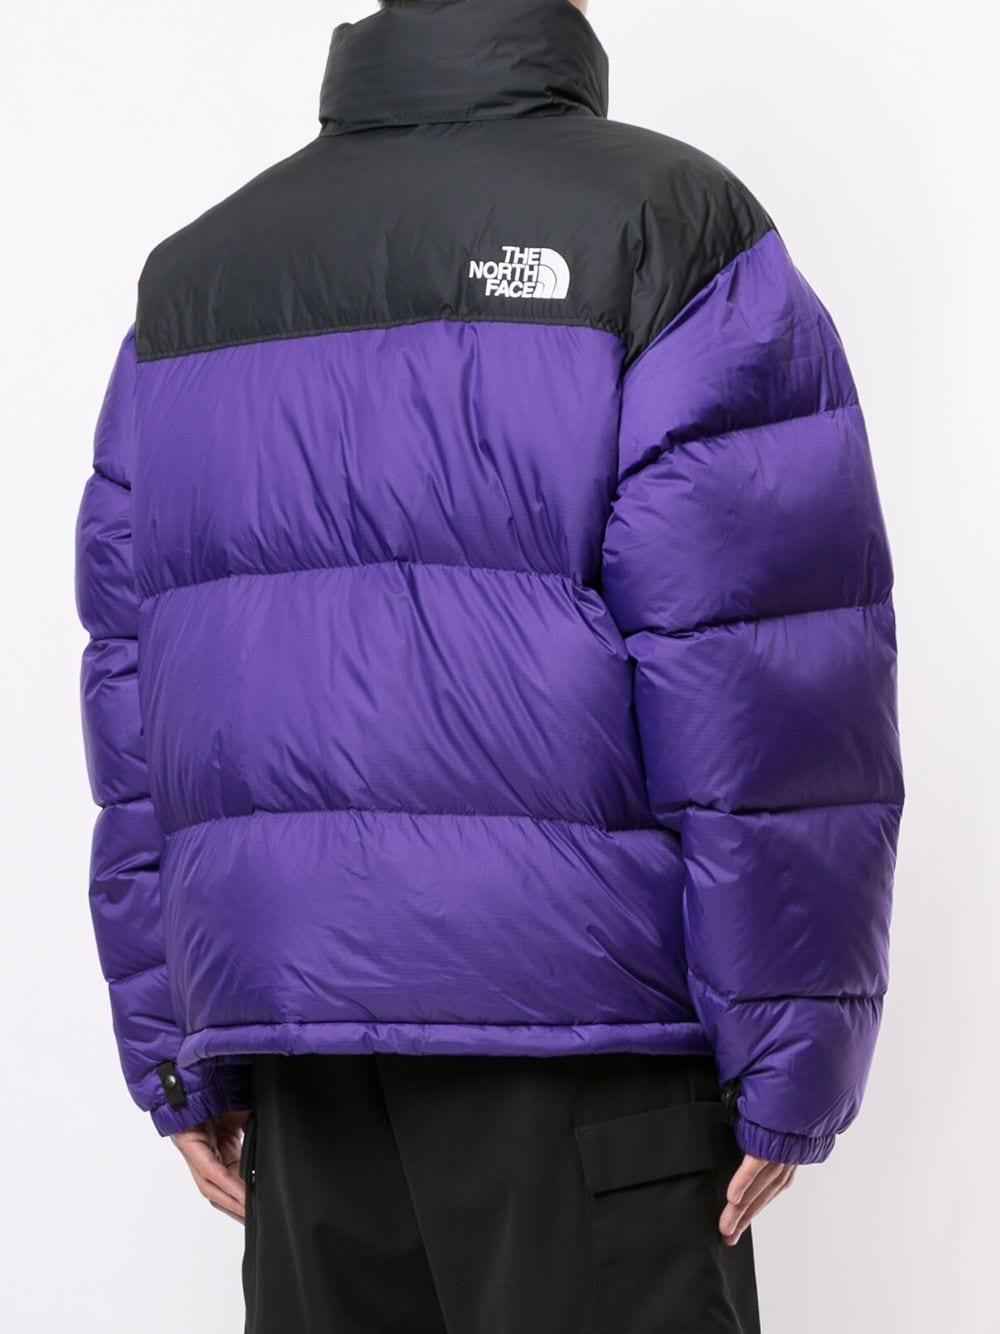 The North Face Retro Nuptse Padded Jacket in Purple for Men - Lyst